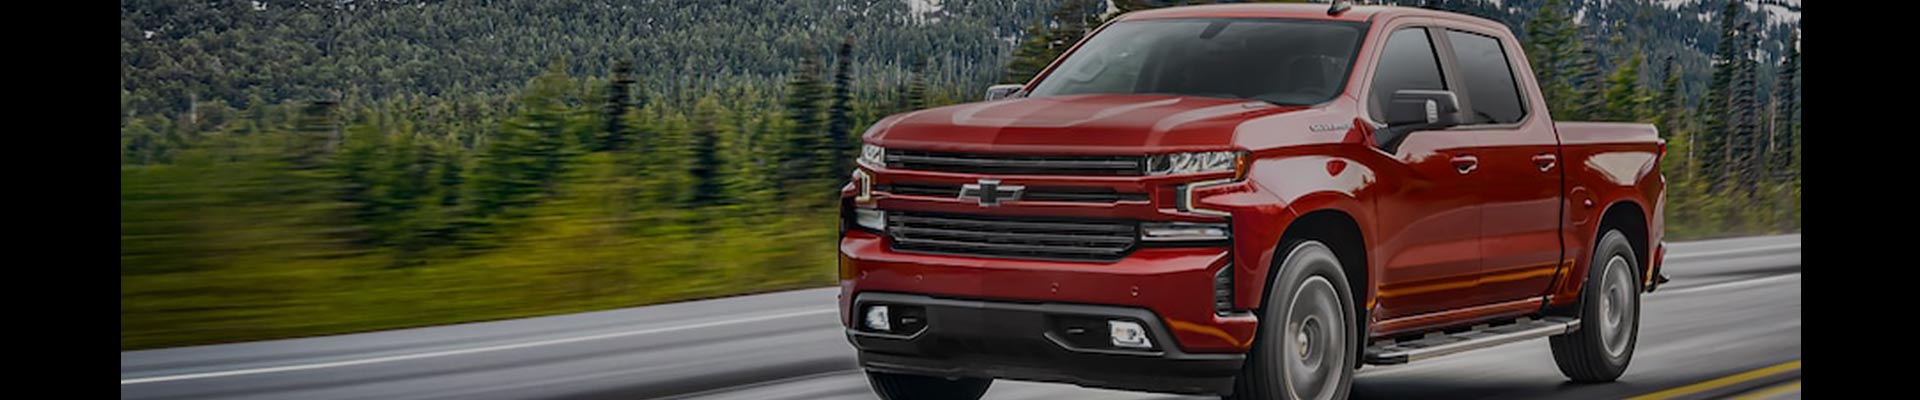 Shop Replacement and OEM 2016 Chevrolet Silverado 1500 Parts with Discounted Price on the Net